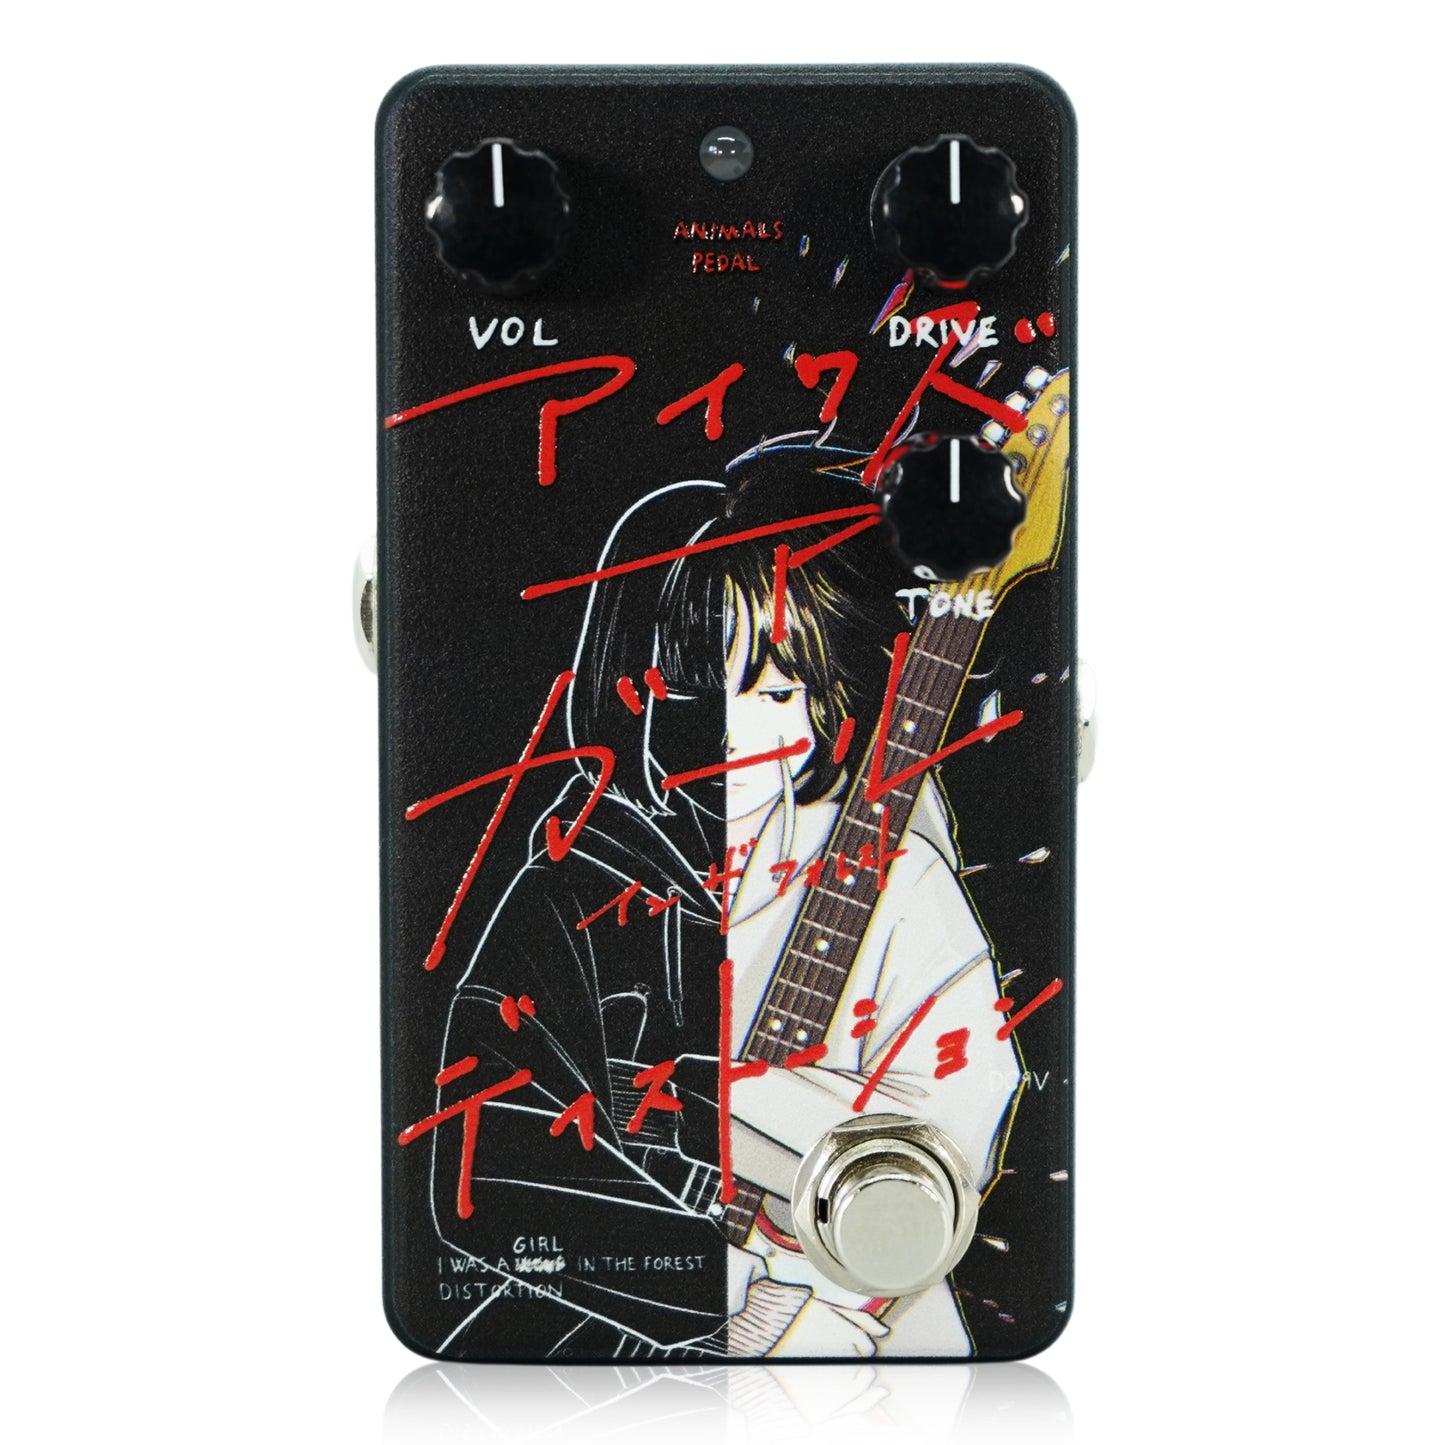 Animals Pedal Custom Illustrated 050 I WAS A GIRL IN THE FOREST DISTORTION by 生活 "Two-sided girl"